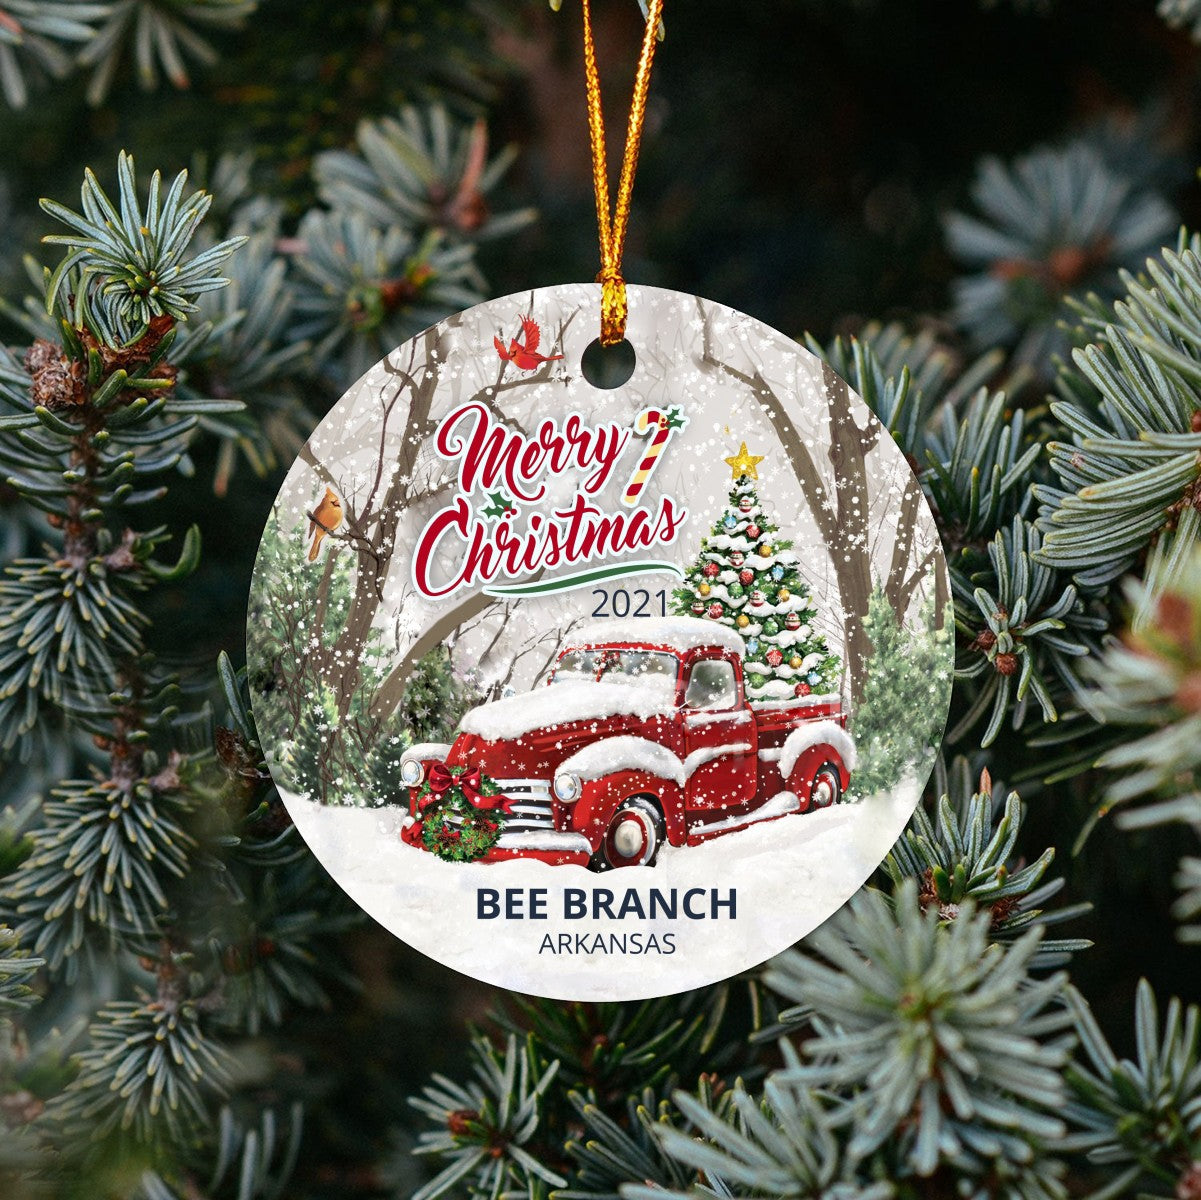 Christmas Tree Ornaments Bee Branch - Ornament With Name City, State Bee Branch Arkansas AR Ornament - Red Truck Xmas Ornaments 3'' Plastic Gift For Family, Friend And Housewarming